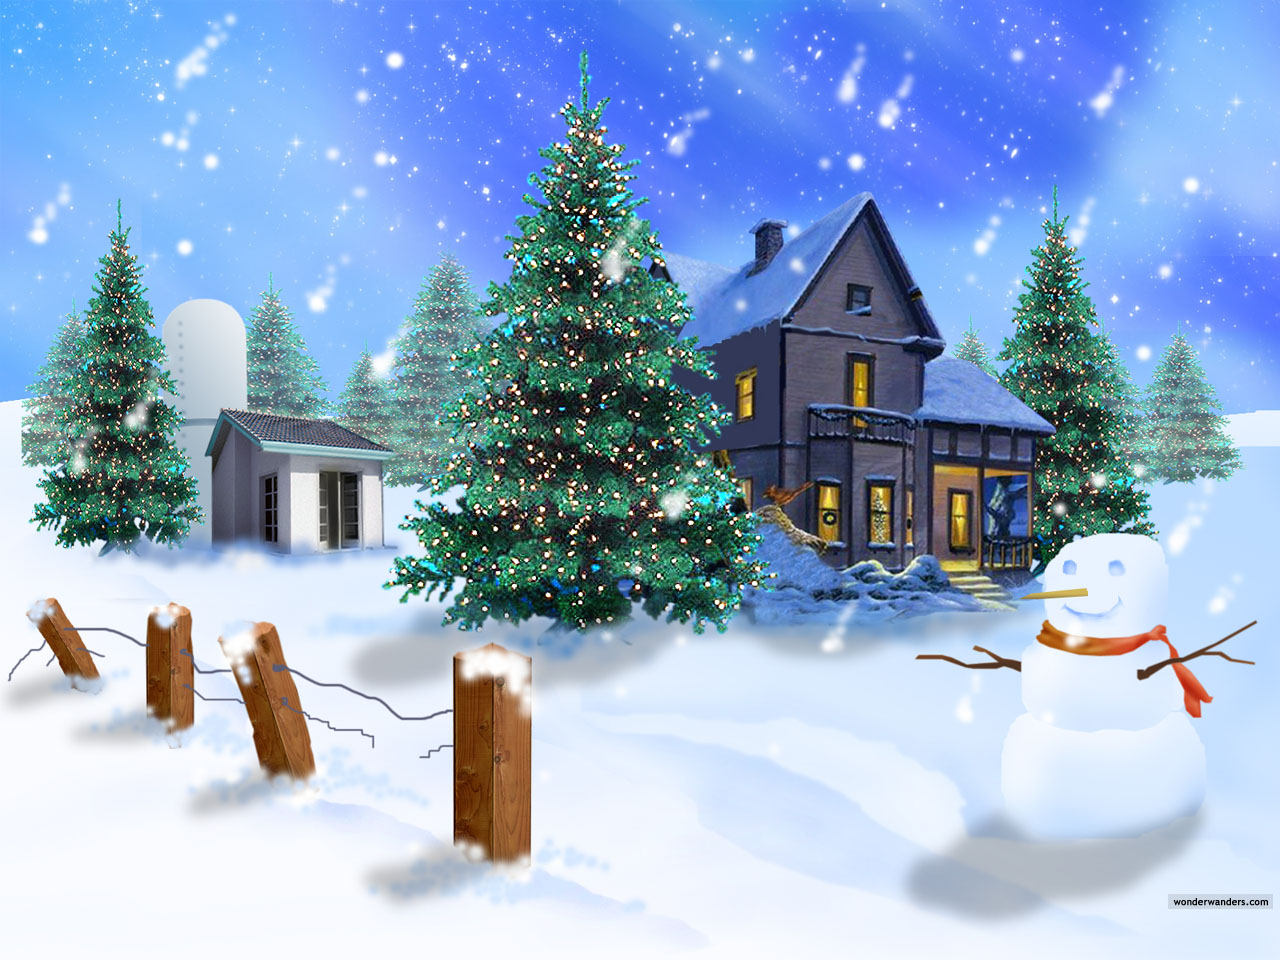 3D Christmas Backgrounds